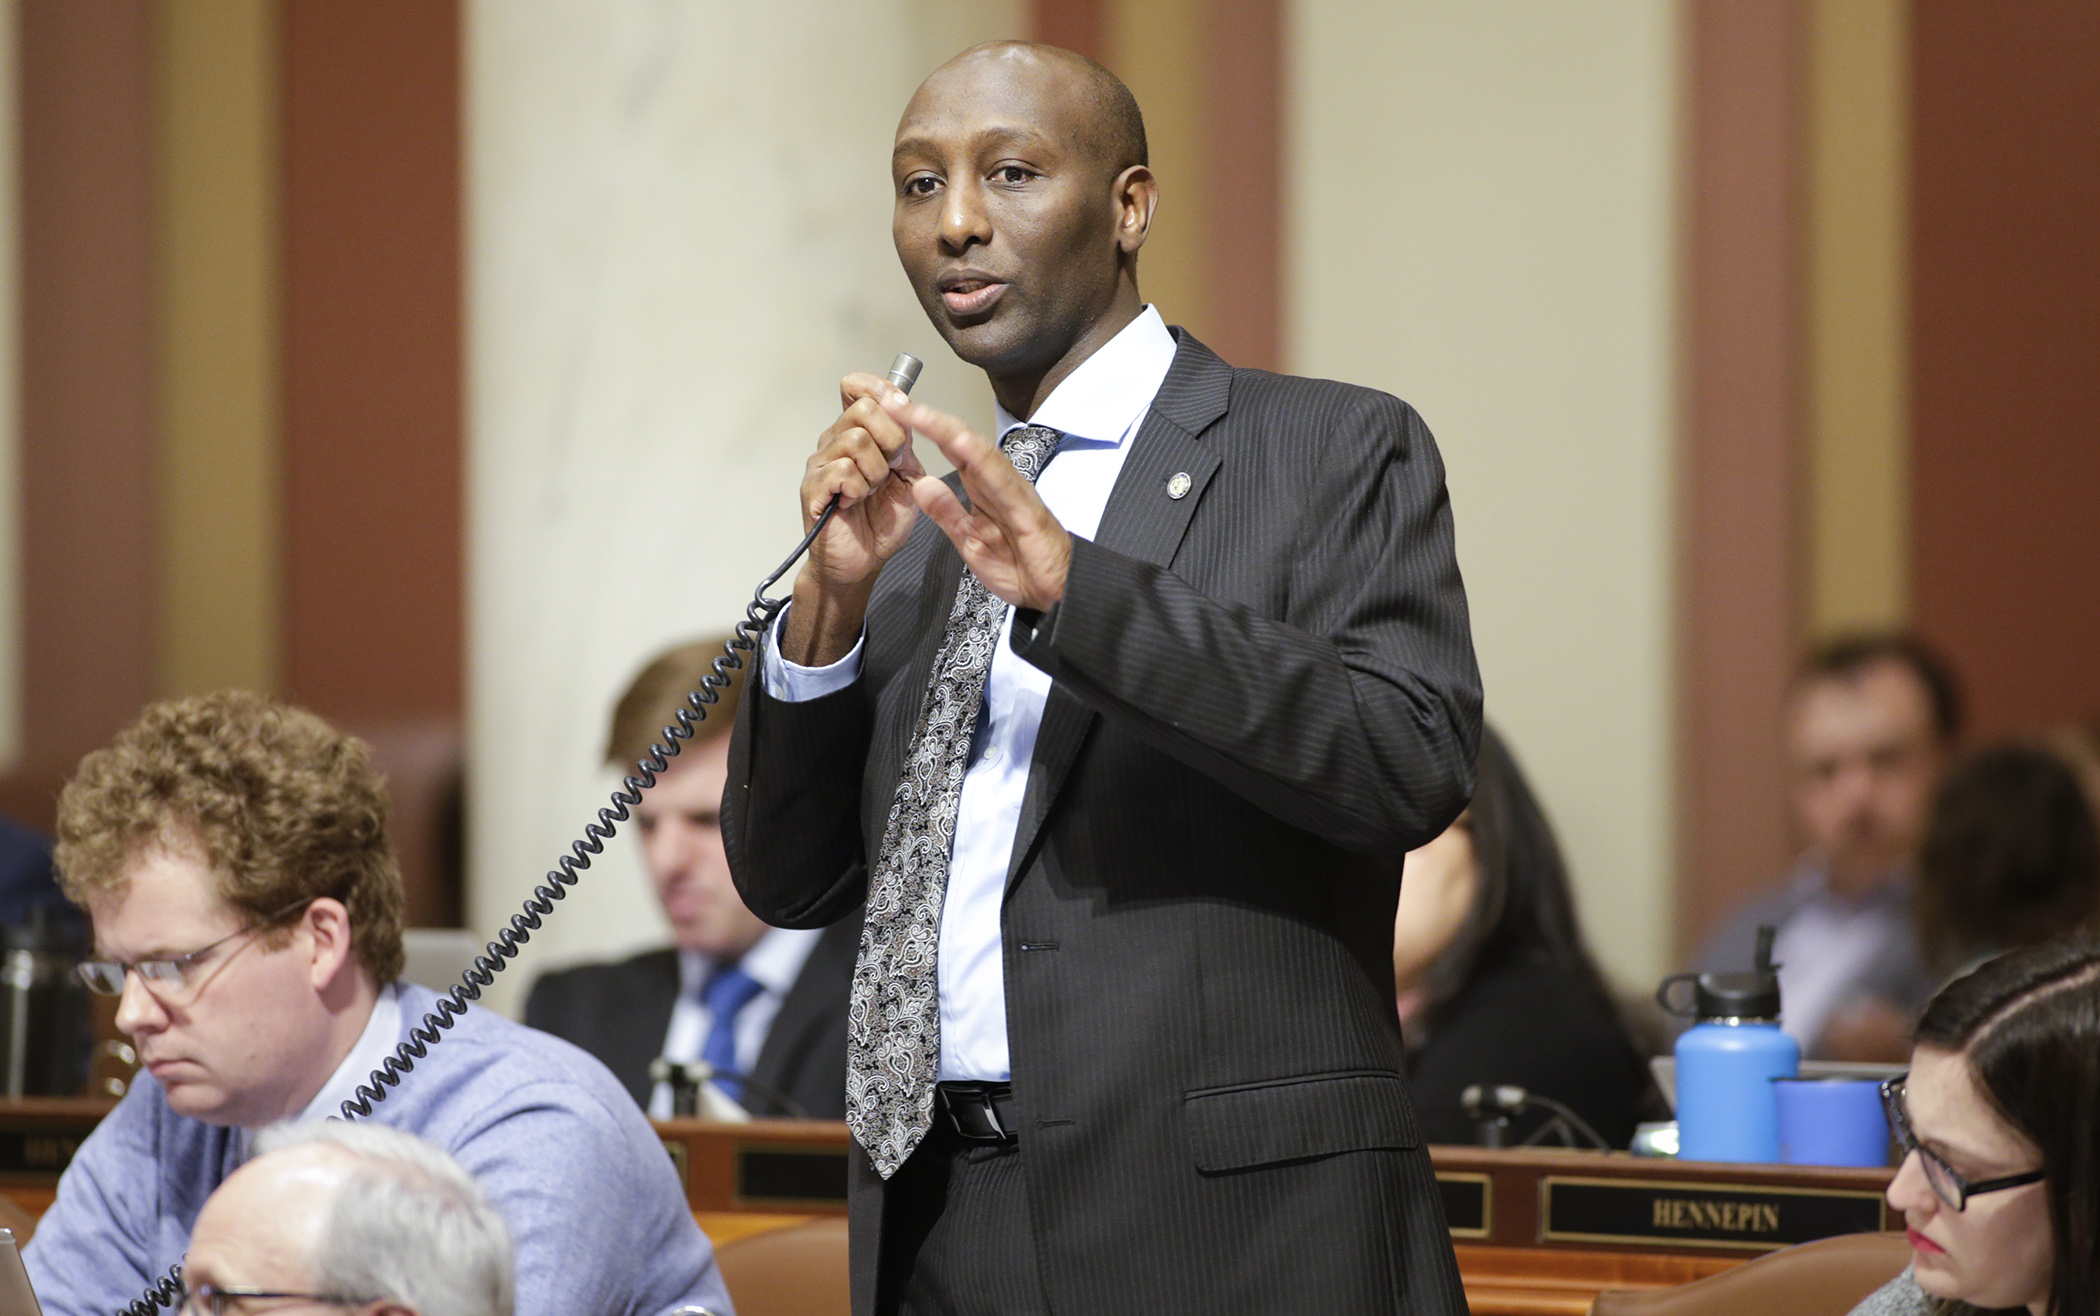 Rep. Mohamud Noor explains provisions of his bill, HF495, which would add new lease requirements to Minnesota law, during floor debate April 1. Photo by Paul Battaglia